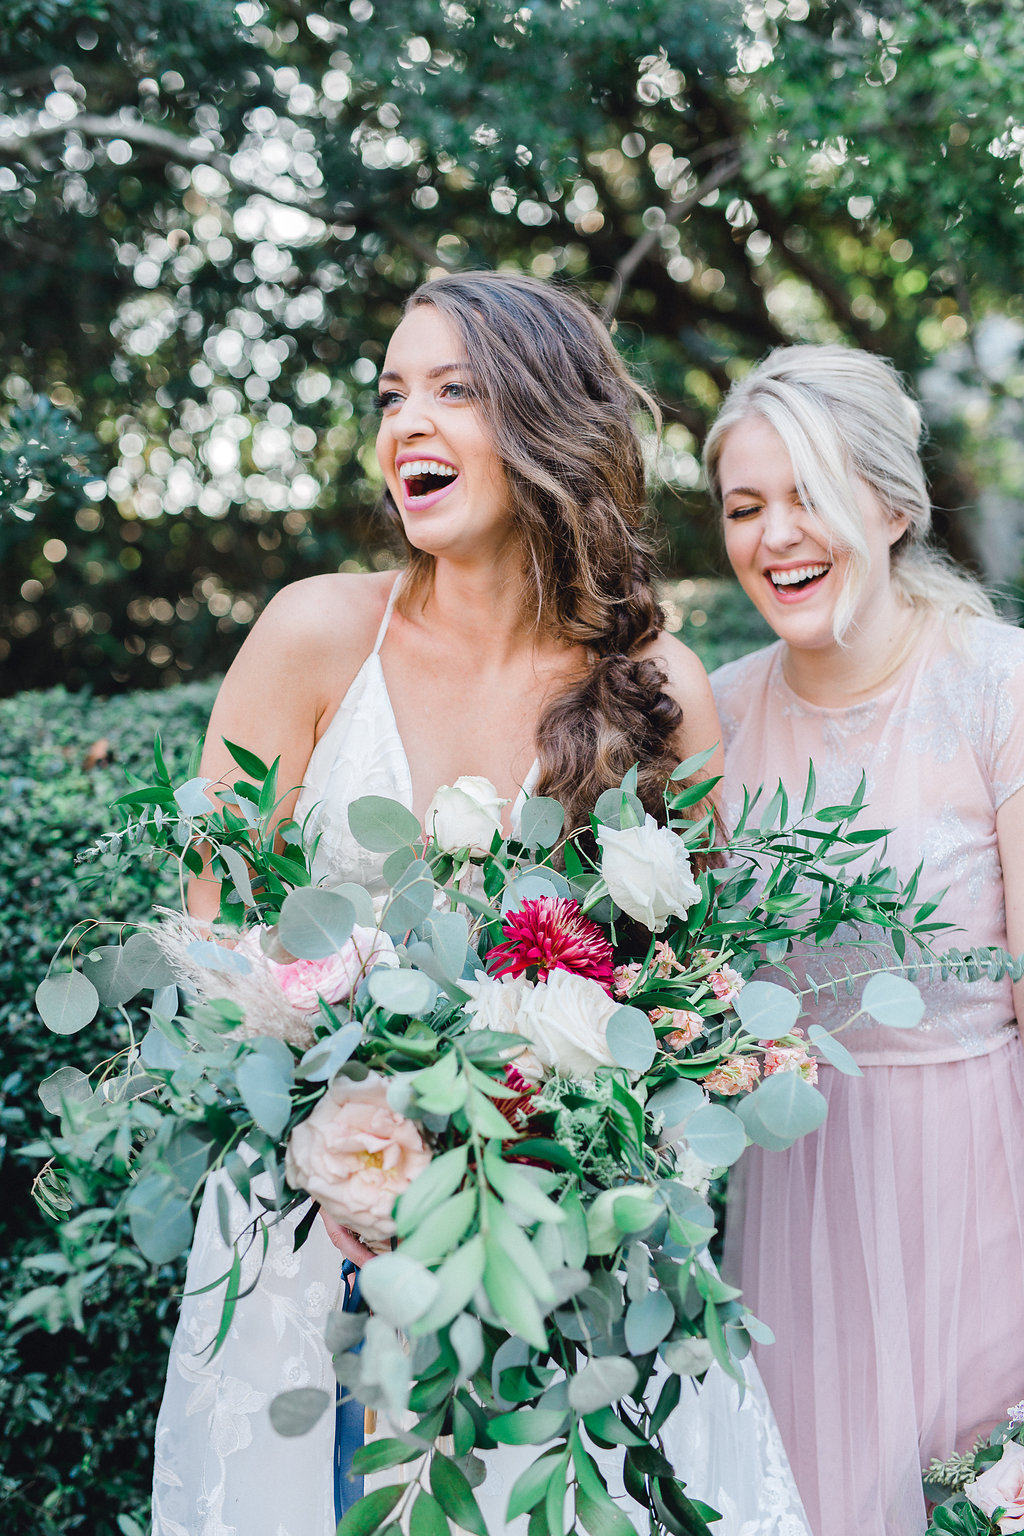 ships-of-the-sea-ivory-and-beau-savannah-wedding-planner-savannah-event-designer-blush-by-hayley-paige-wedding-dress-hayley-paige-occasions-savannah-bridal-boutique-savannah-wedding-planners-savannah-event-designer-savannah-florist.JPG